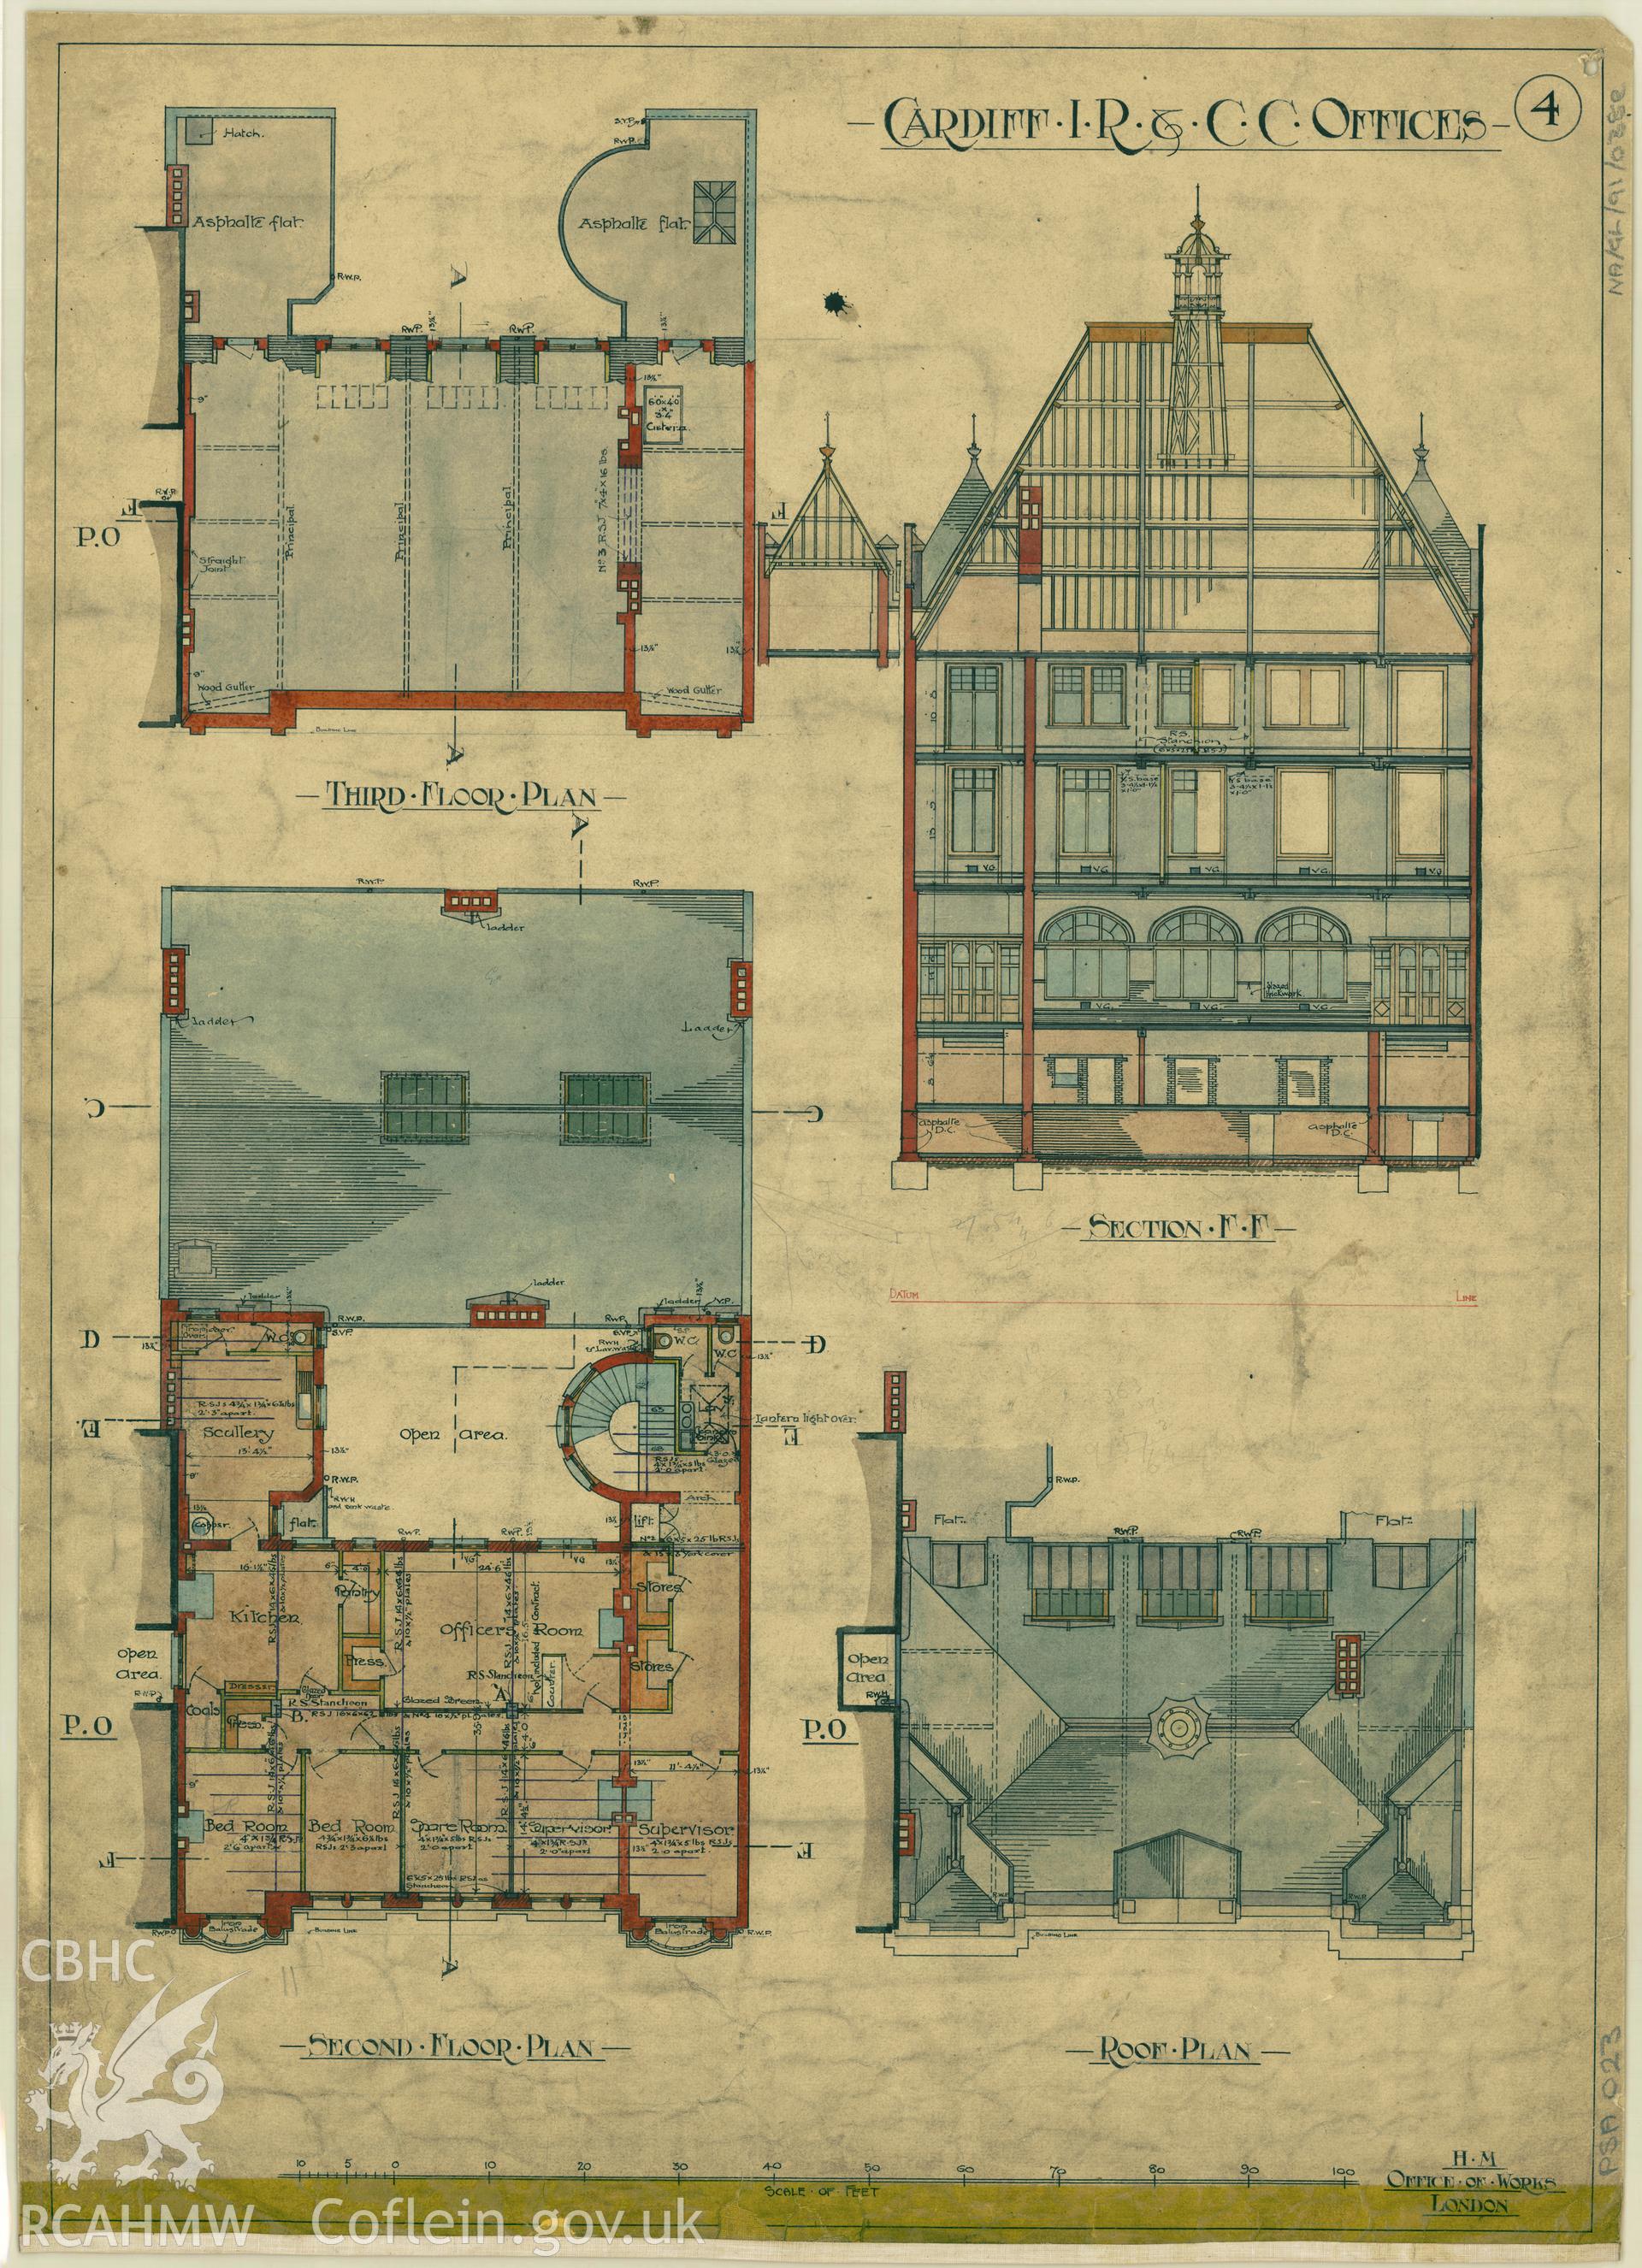 Cardiff Inland Revenue and County Court Offices; measured drawing showing second floor plan, third floor plan, roof plan and section view, produced by H.M. Office of Works,  undated.